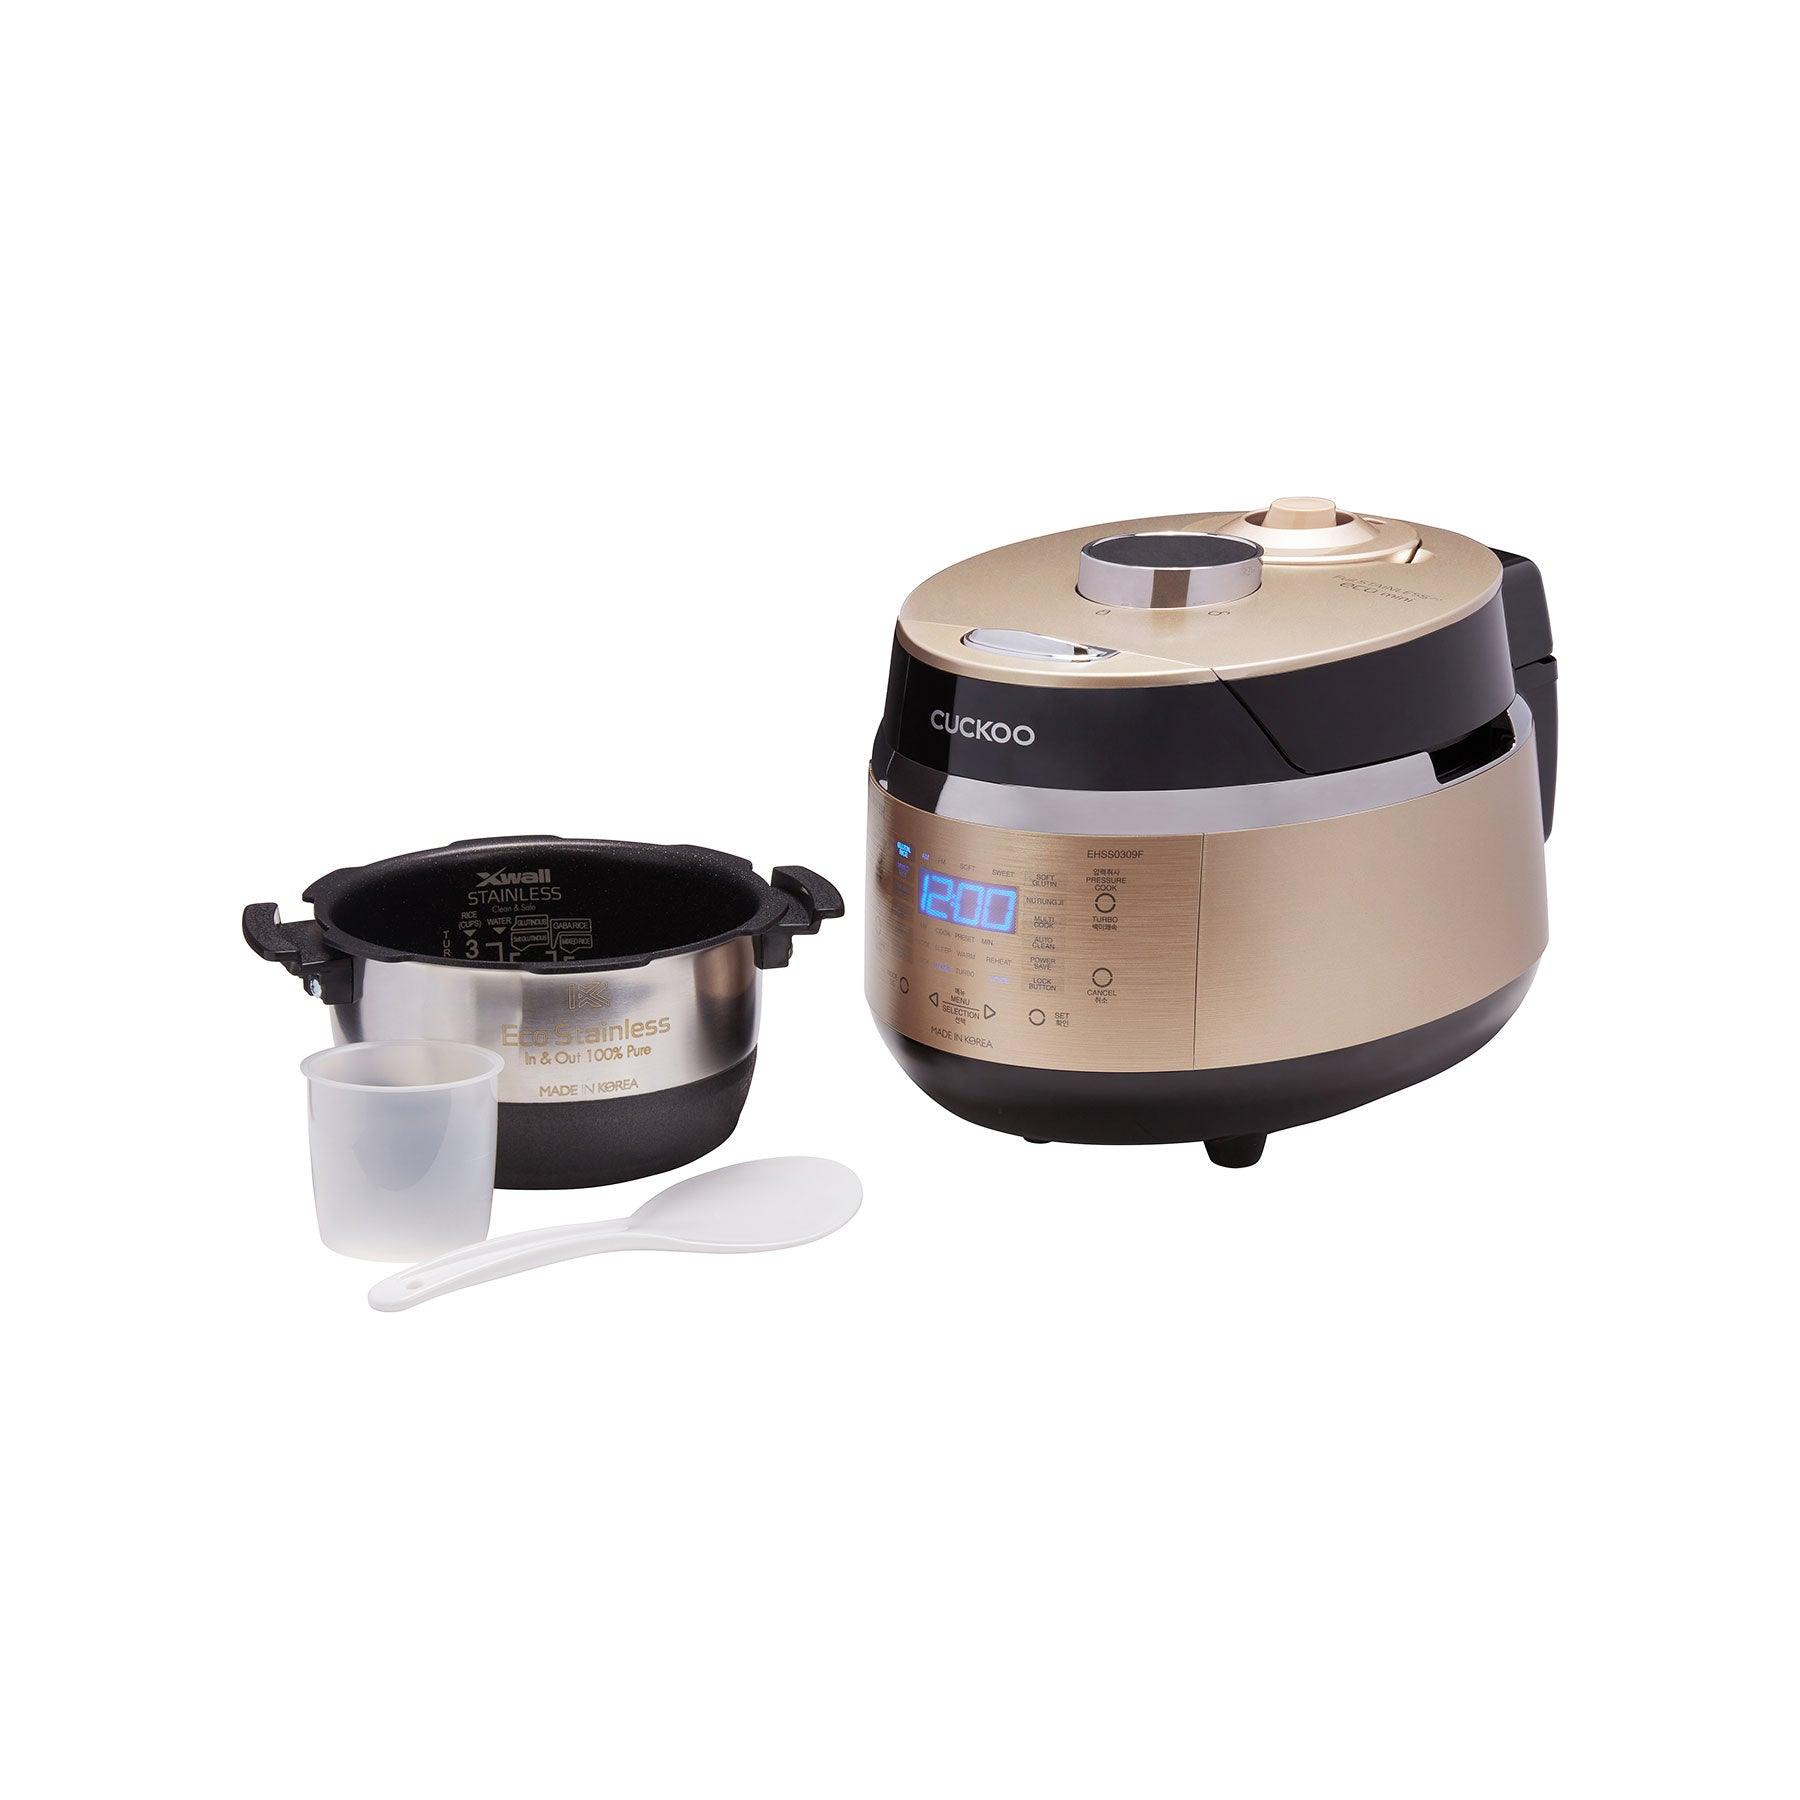 CRP-P0609S 120V 6 Cup Electric Pressure Rice Cooker, Brown